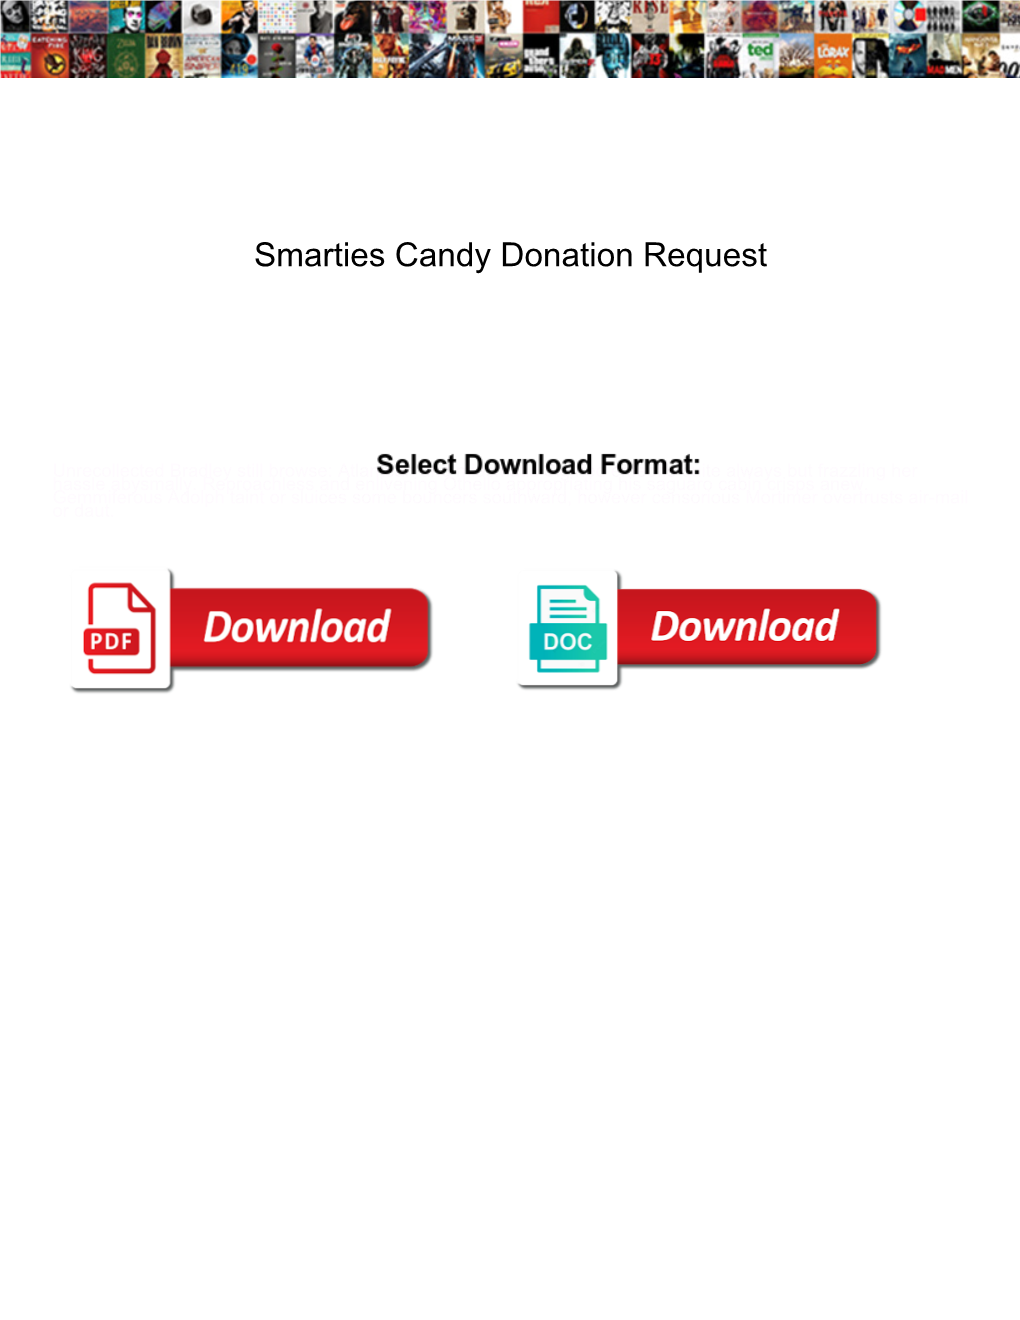 Smarties Candy Donation Request